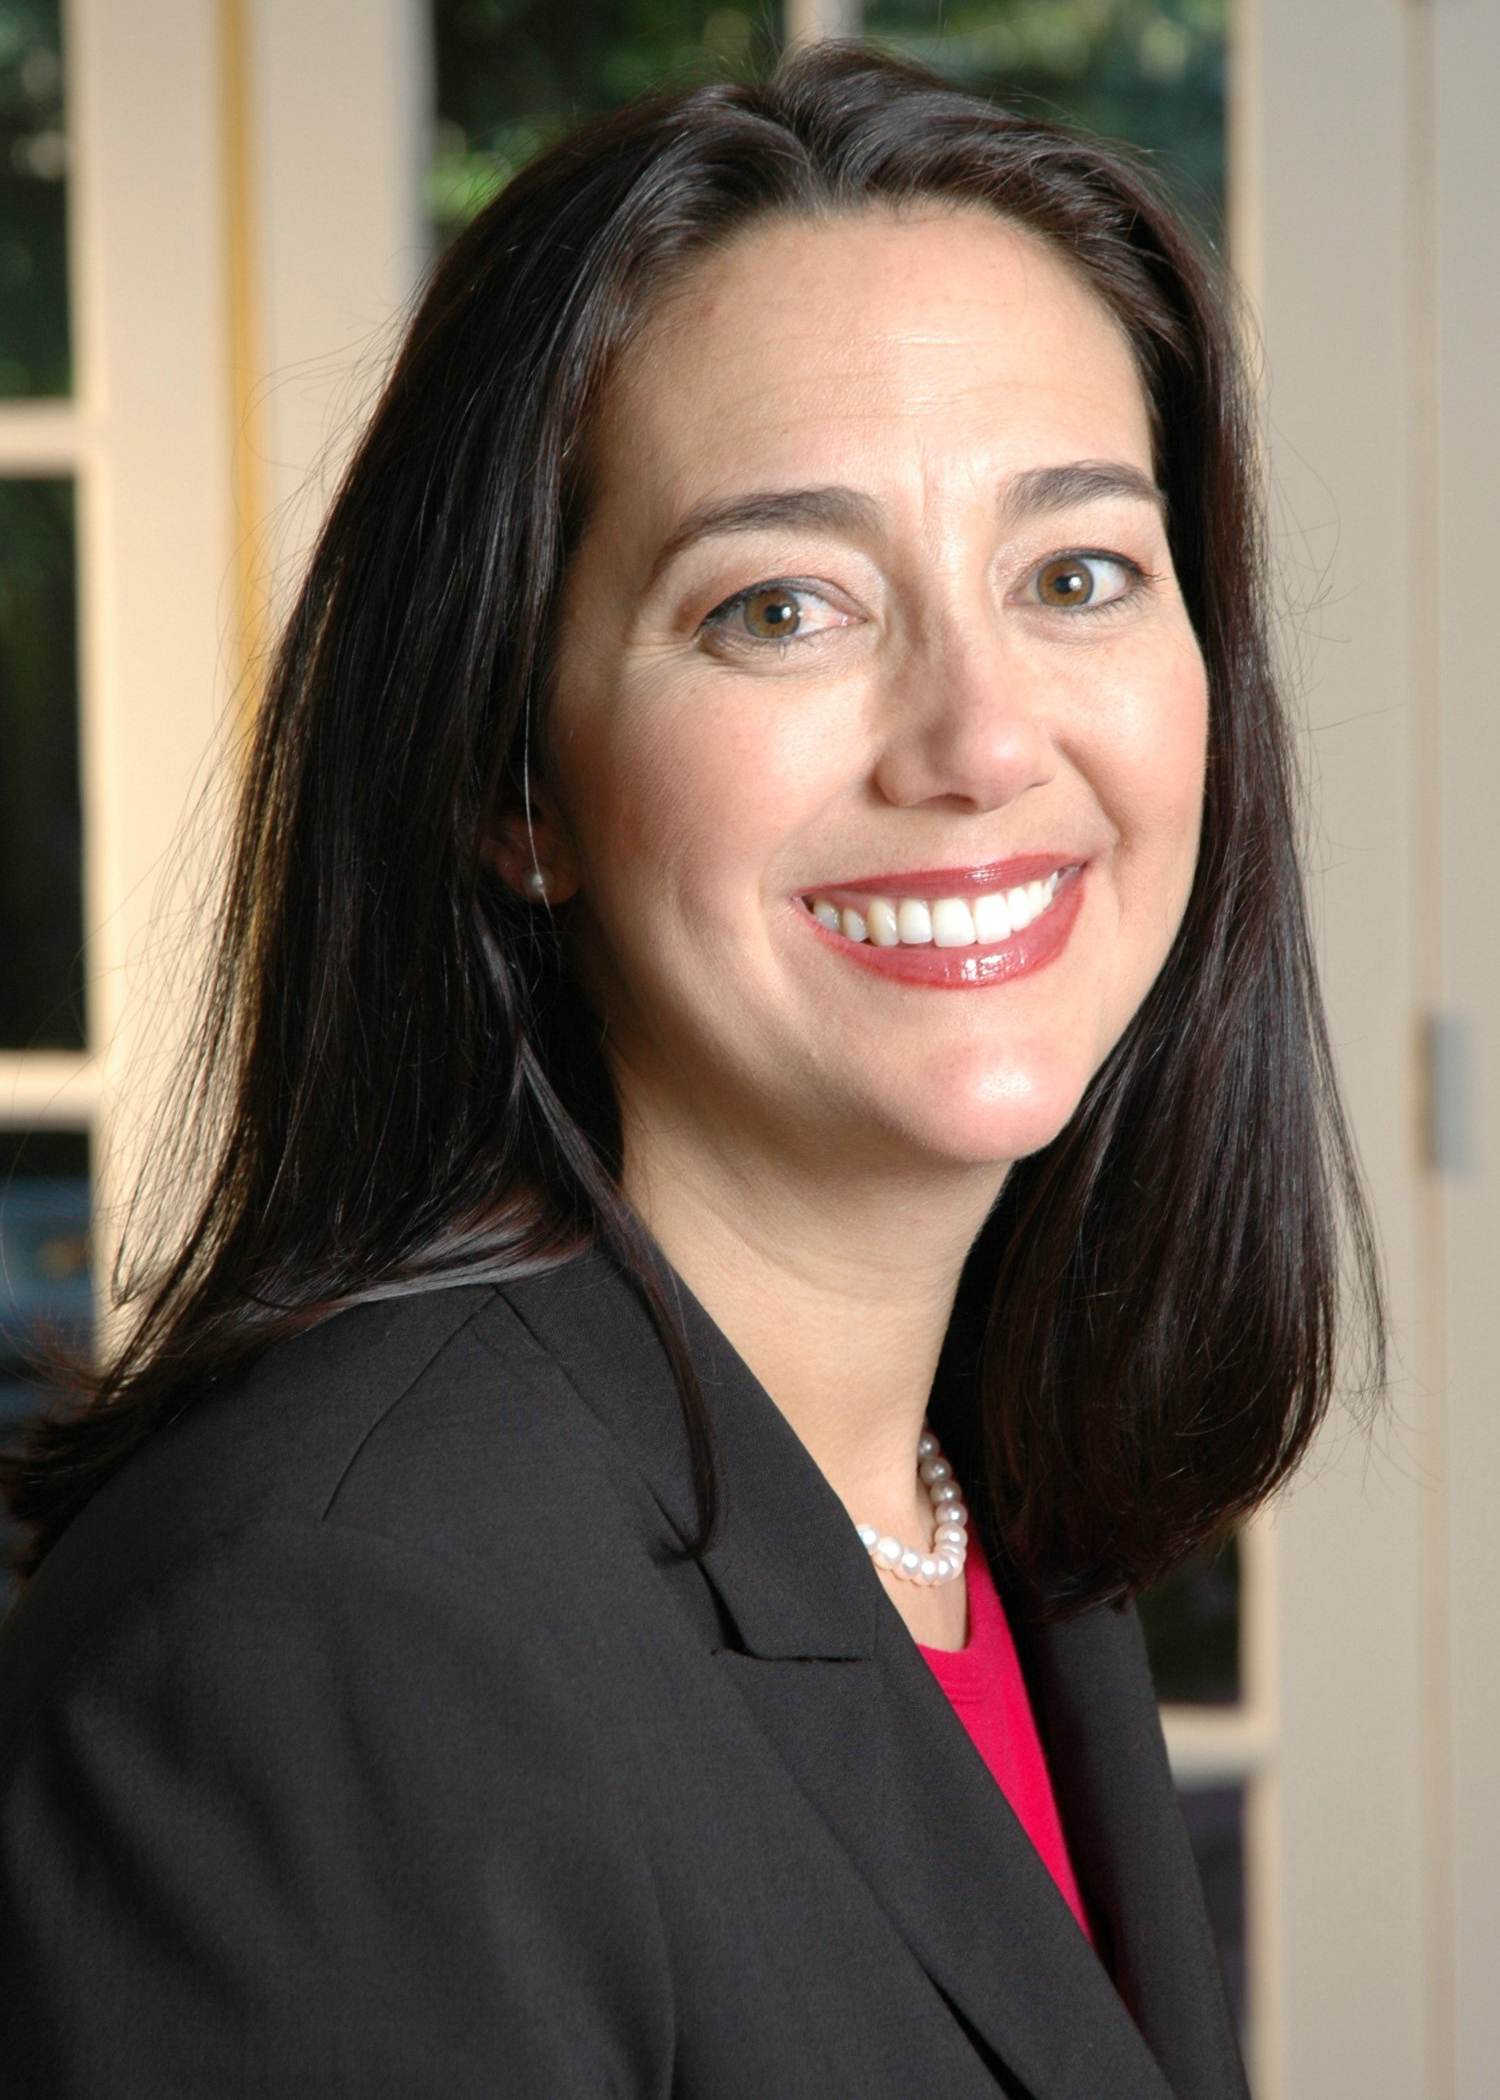 Education reform activist, Erin Gruwell, is the featured keynote speaker at this year's Access to Justice Awards Dinner and Ceremony.